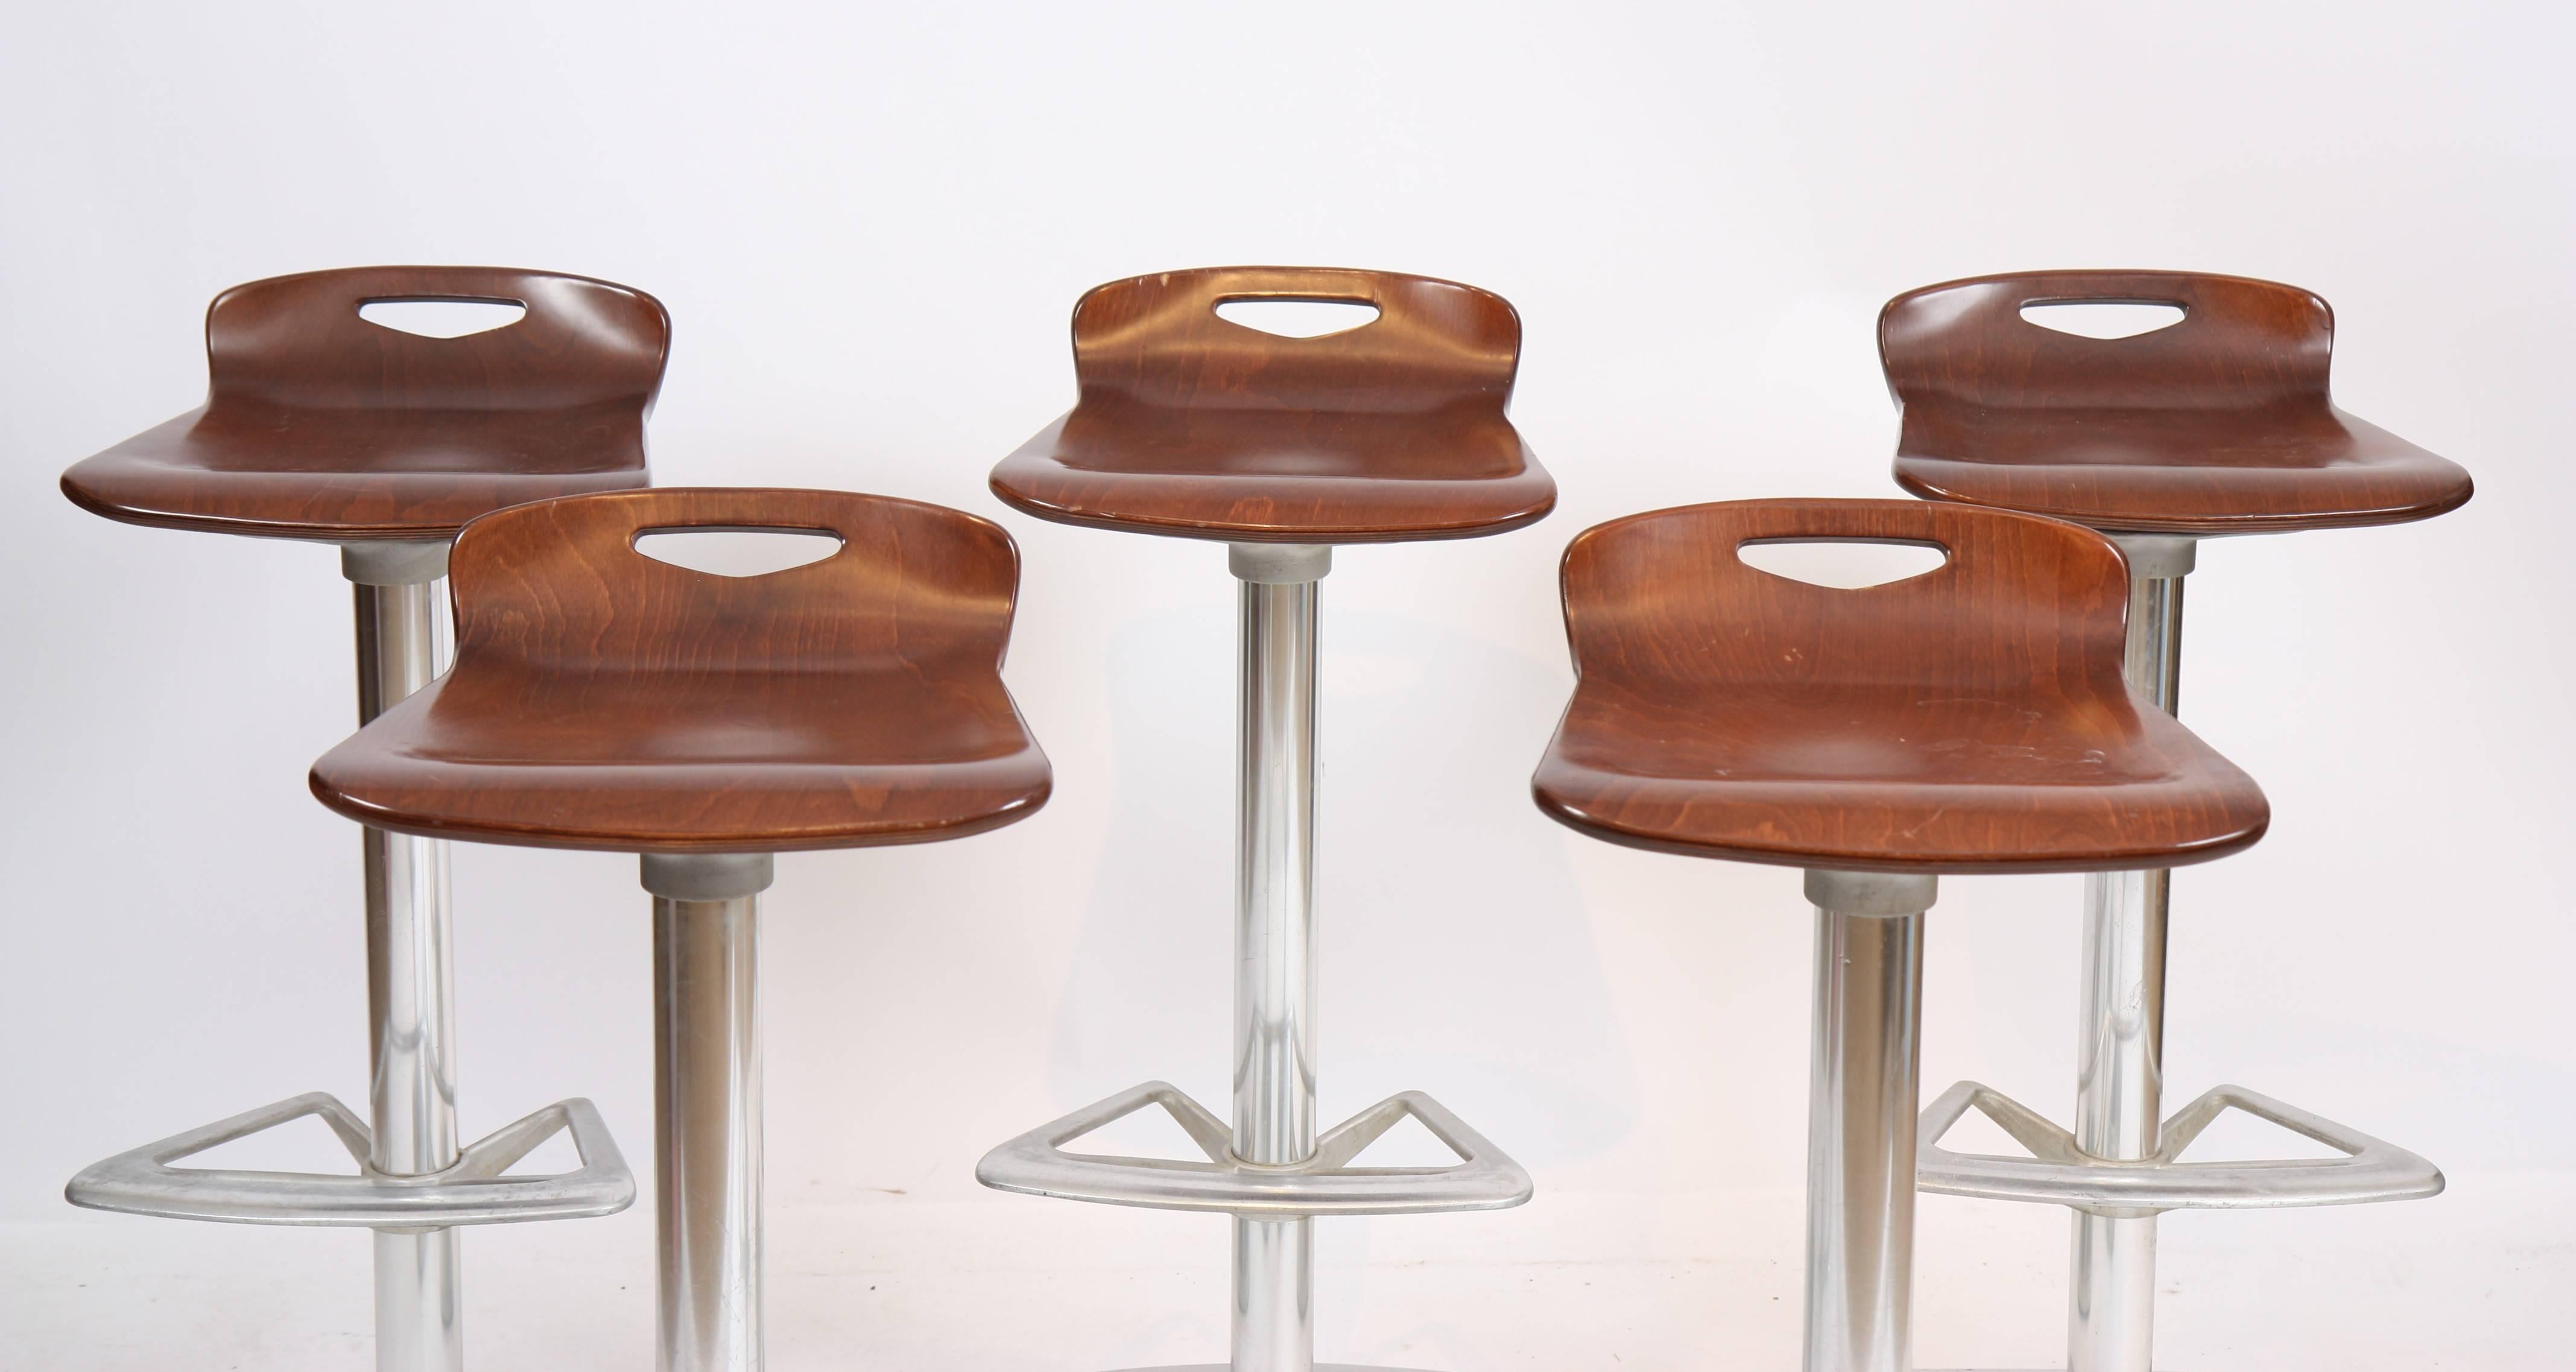 Set of five stools with design and minimalist curves. Their seat in walnut veneer and foot in chromed aluminium supporting a footrest. From house Indecasa, Spain, 1980s.
Very good condition.
The Spanish brand has succeeded in over 40 years in the